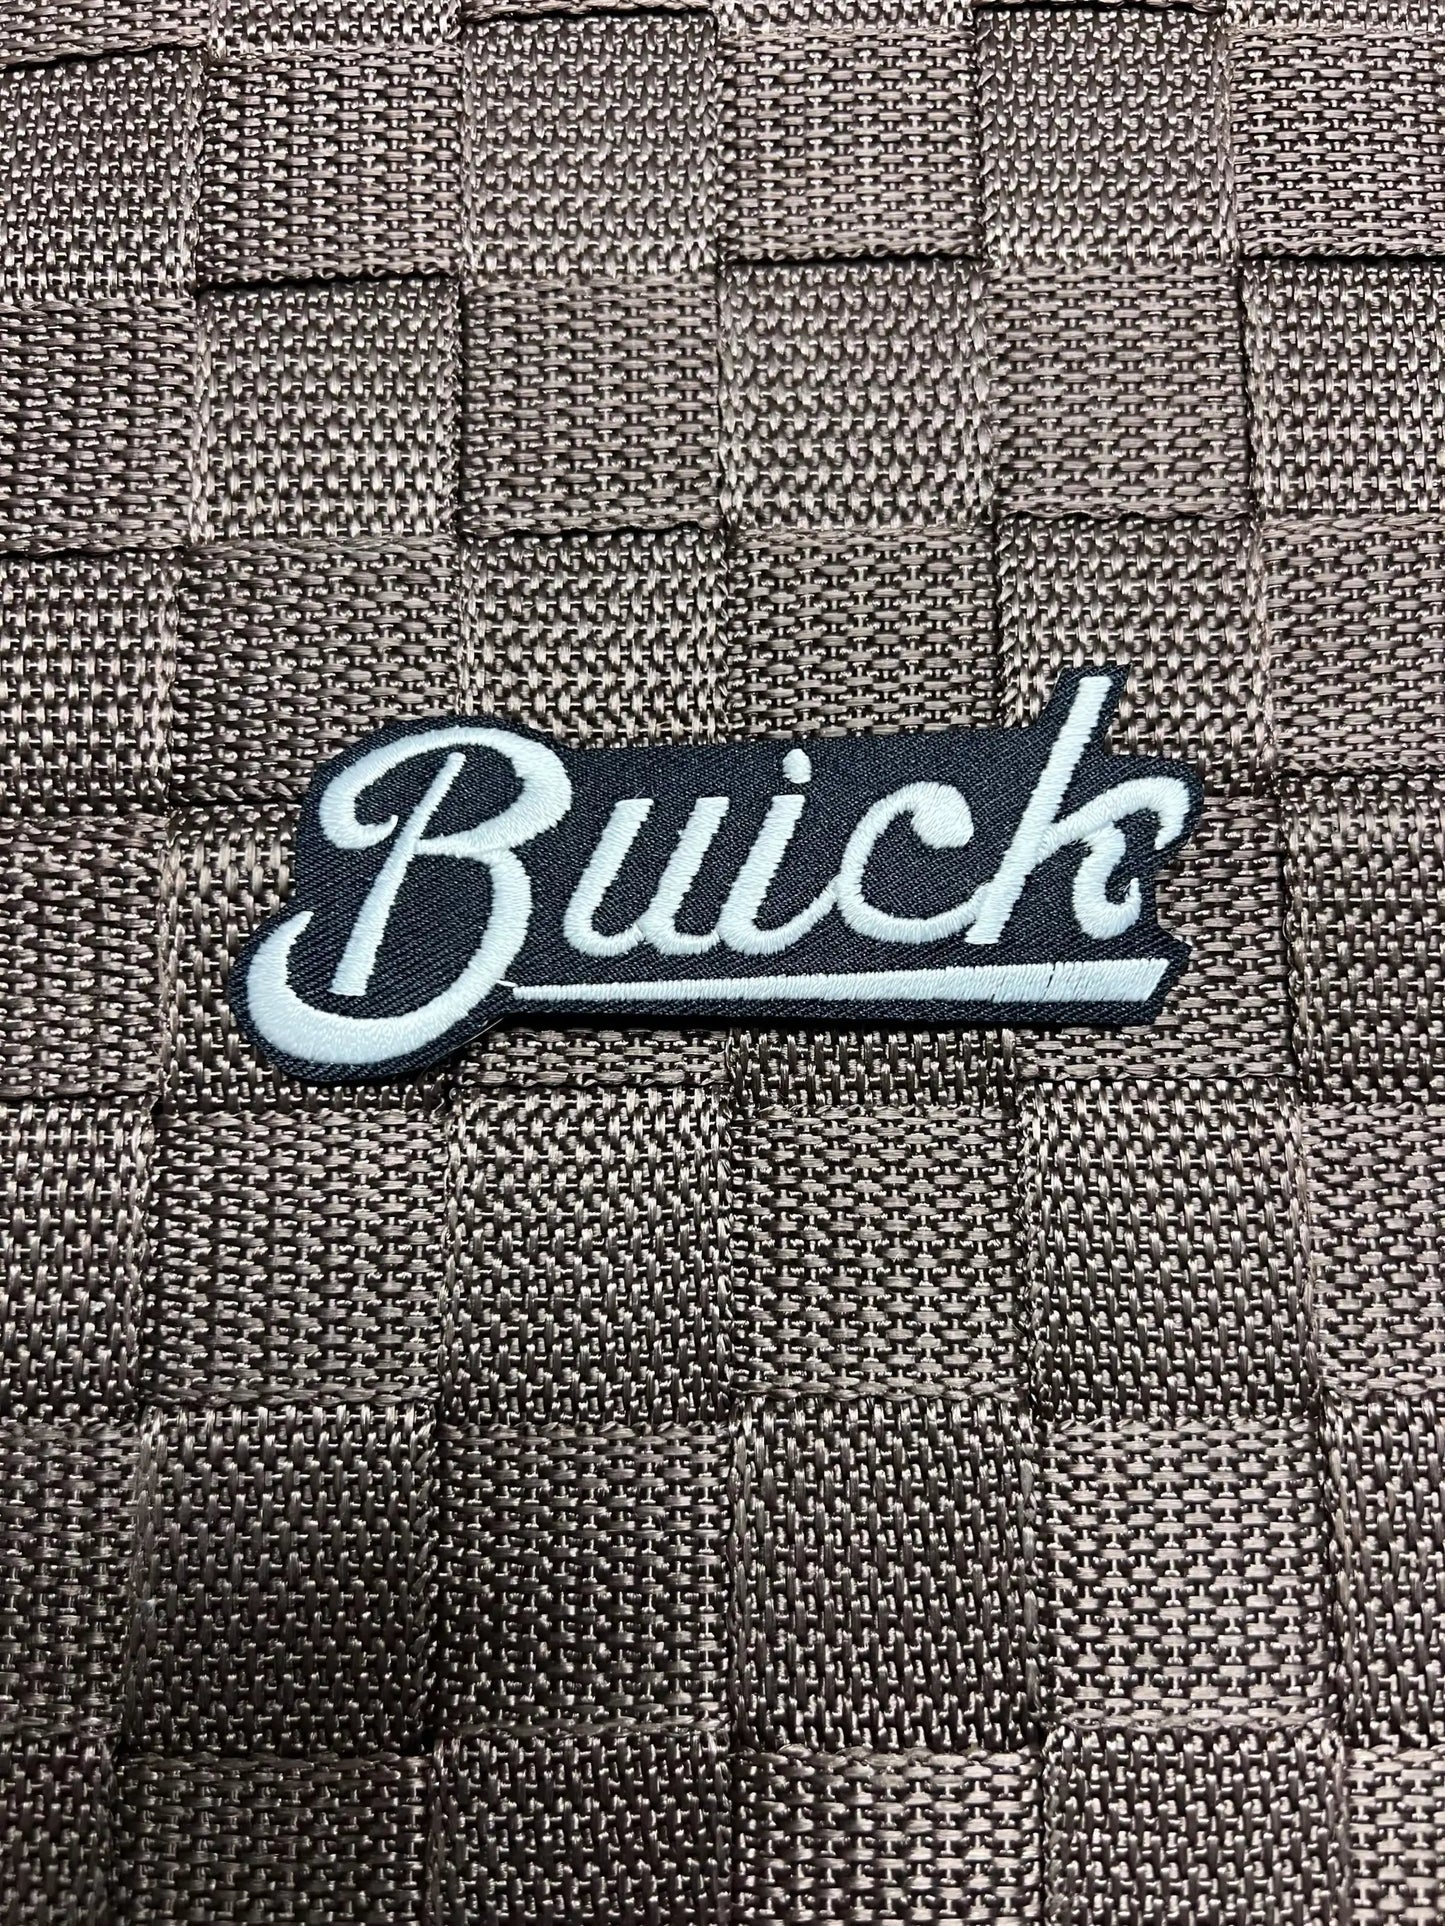 Buick Script Patch New Old Stock Great Item for Hat Shirt or Jacket. Relic has been stored away safely for decades and uniquely measures 1.5 in x 3 inches